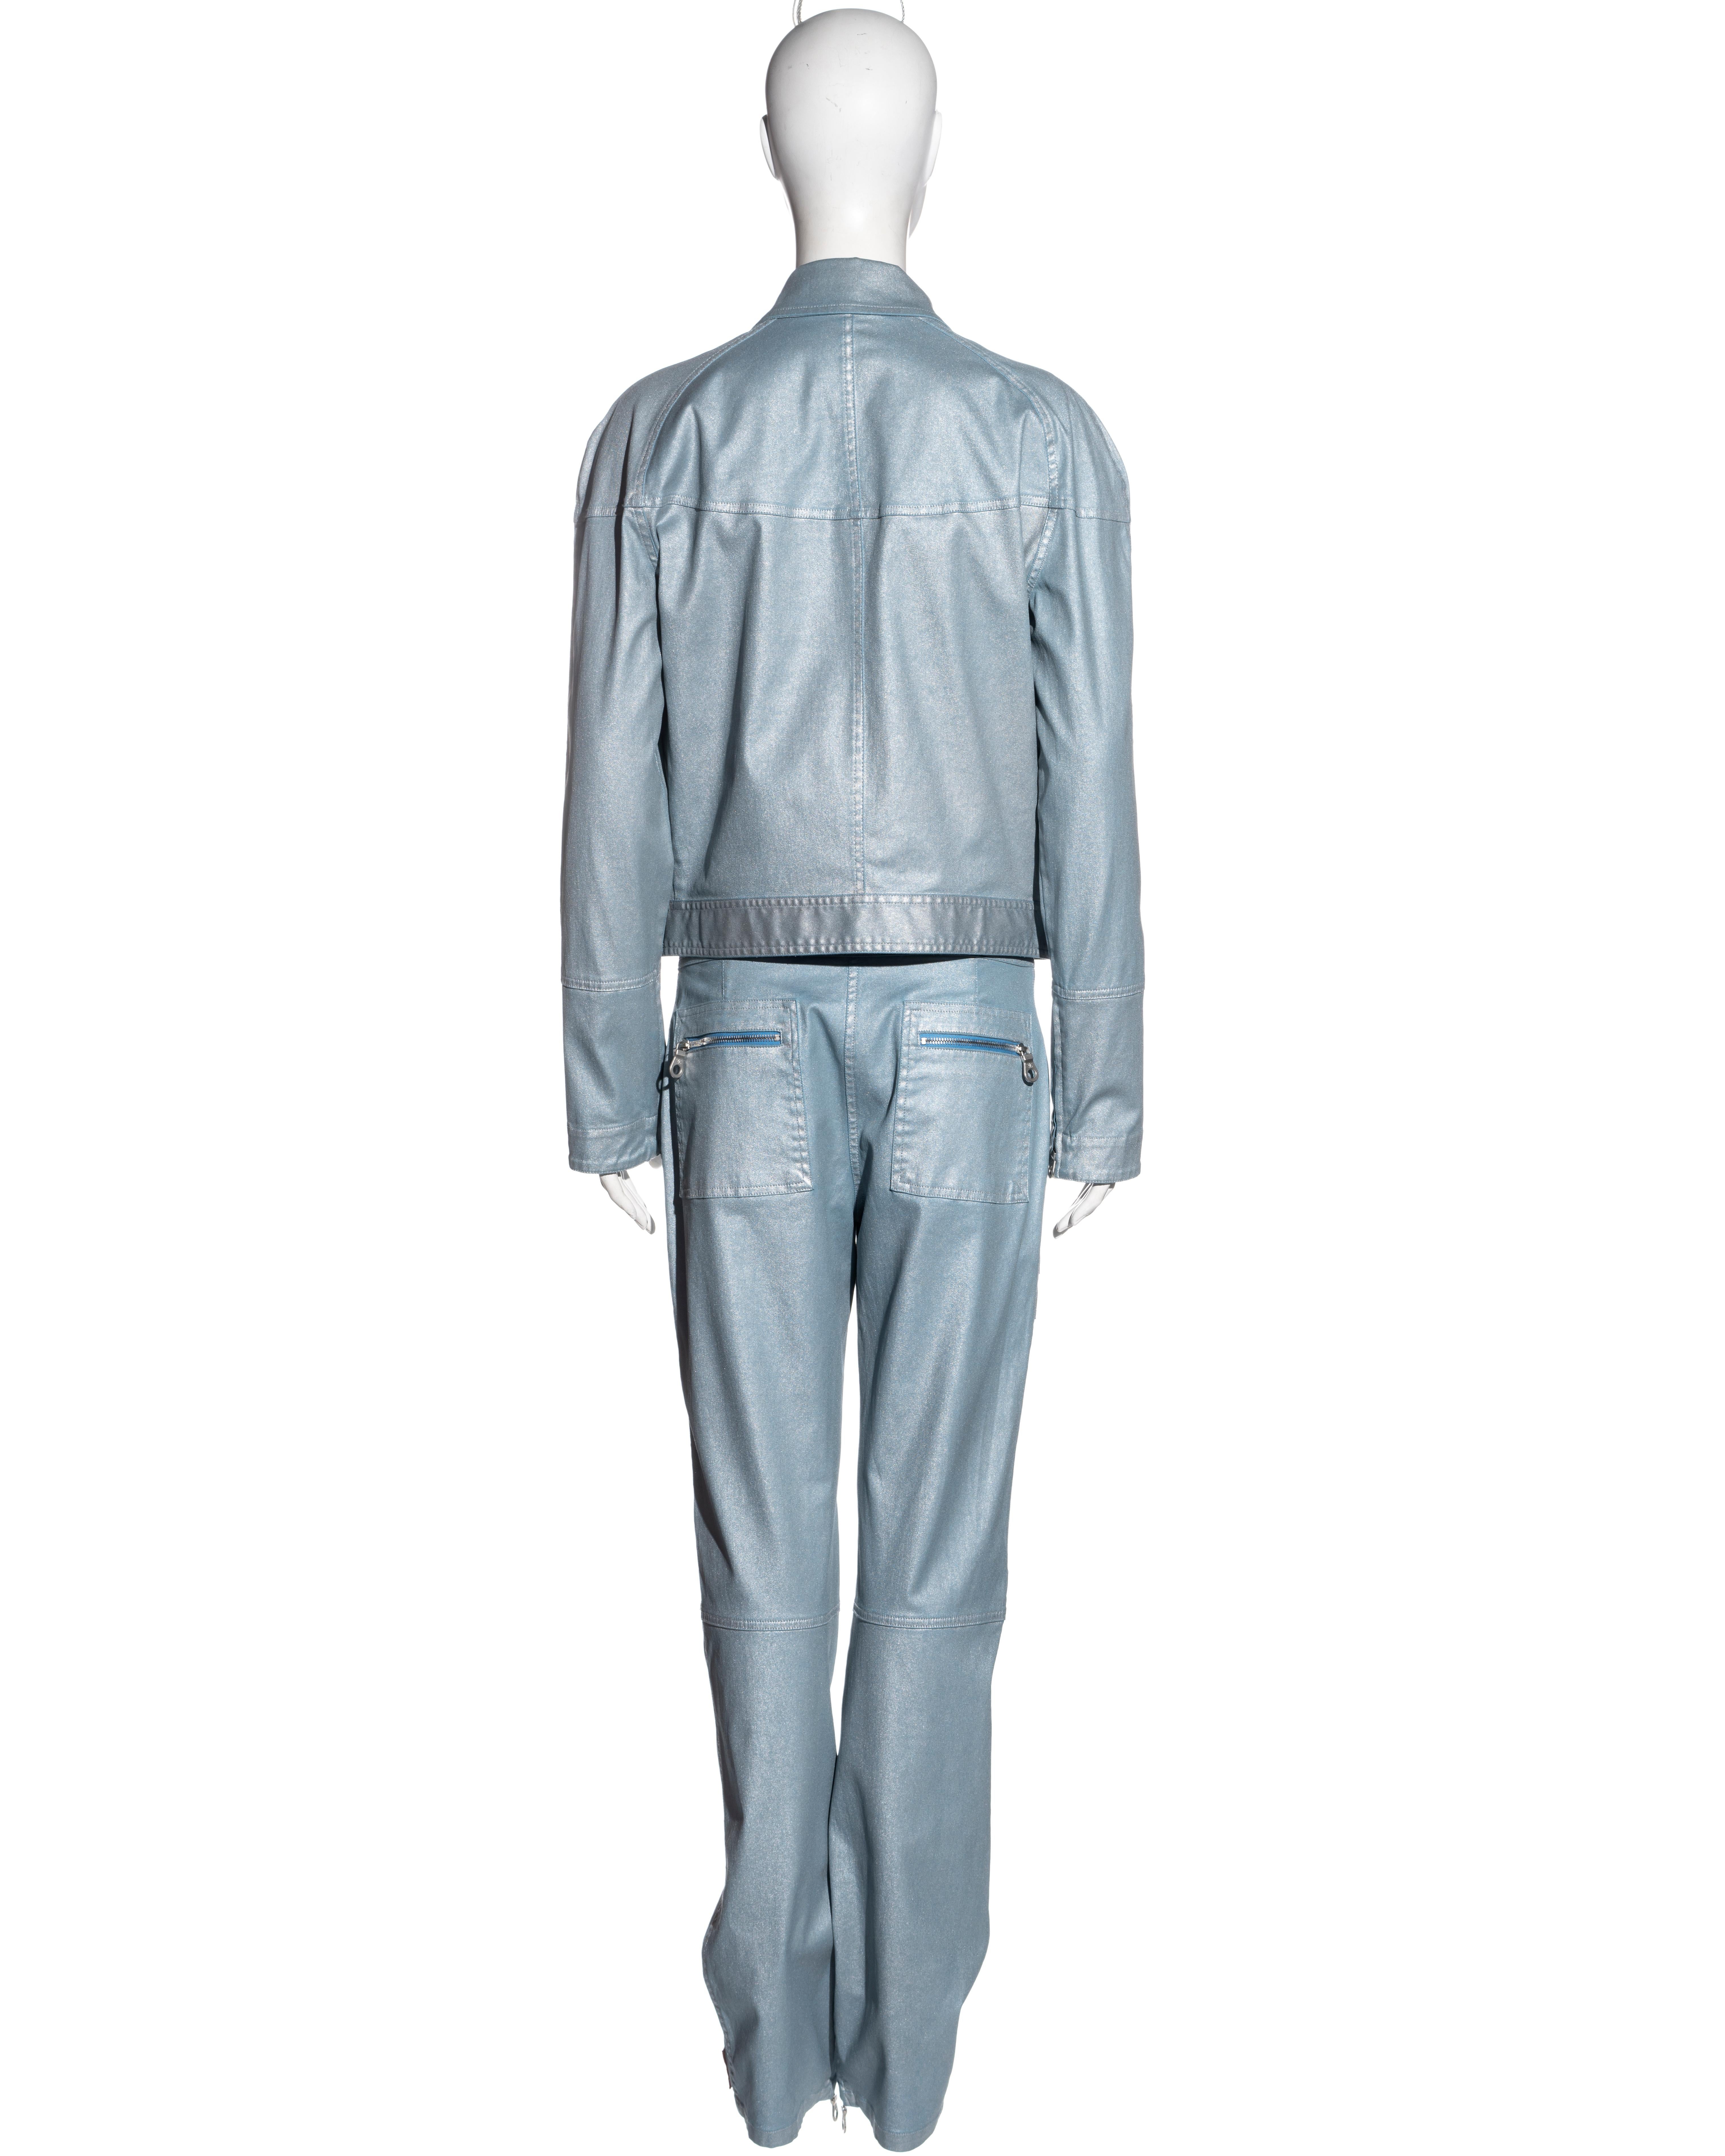 Chanel by Karl Lagerfeld metallic blue cotton jacket and pants set, ss 2002 For Sale 4